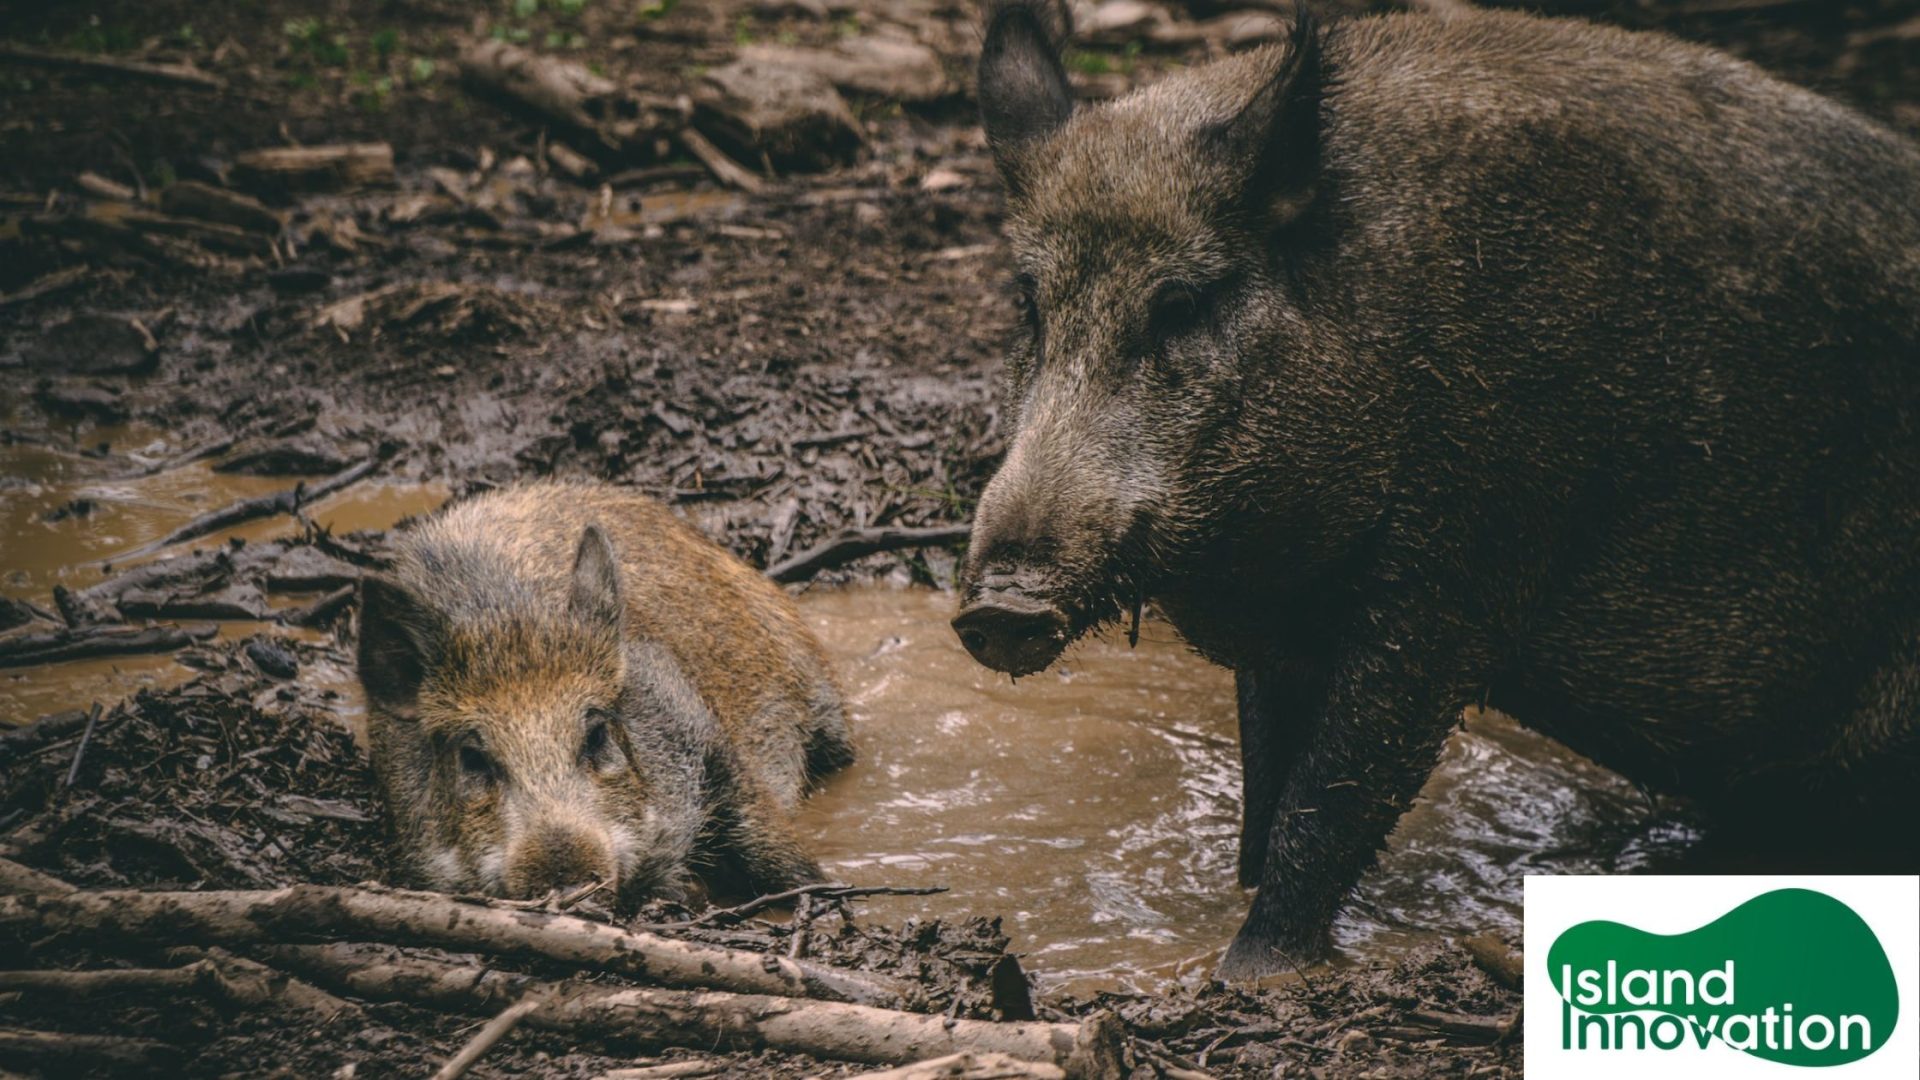 Bearded pigs a ‘cultural keystone species’ for Borneo’s Indigenous groups: Study